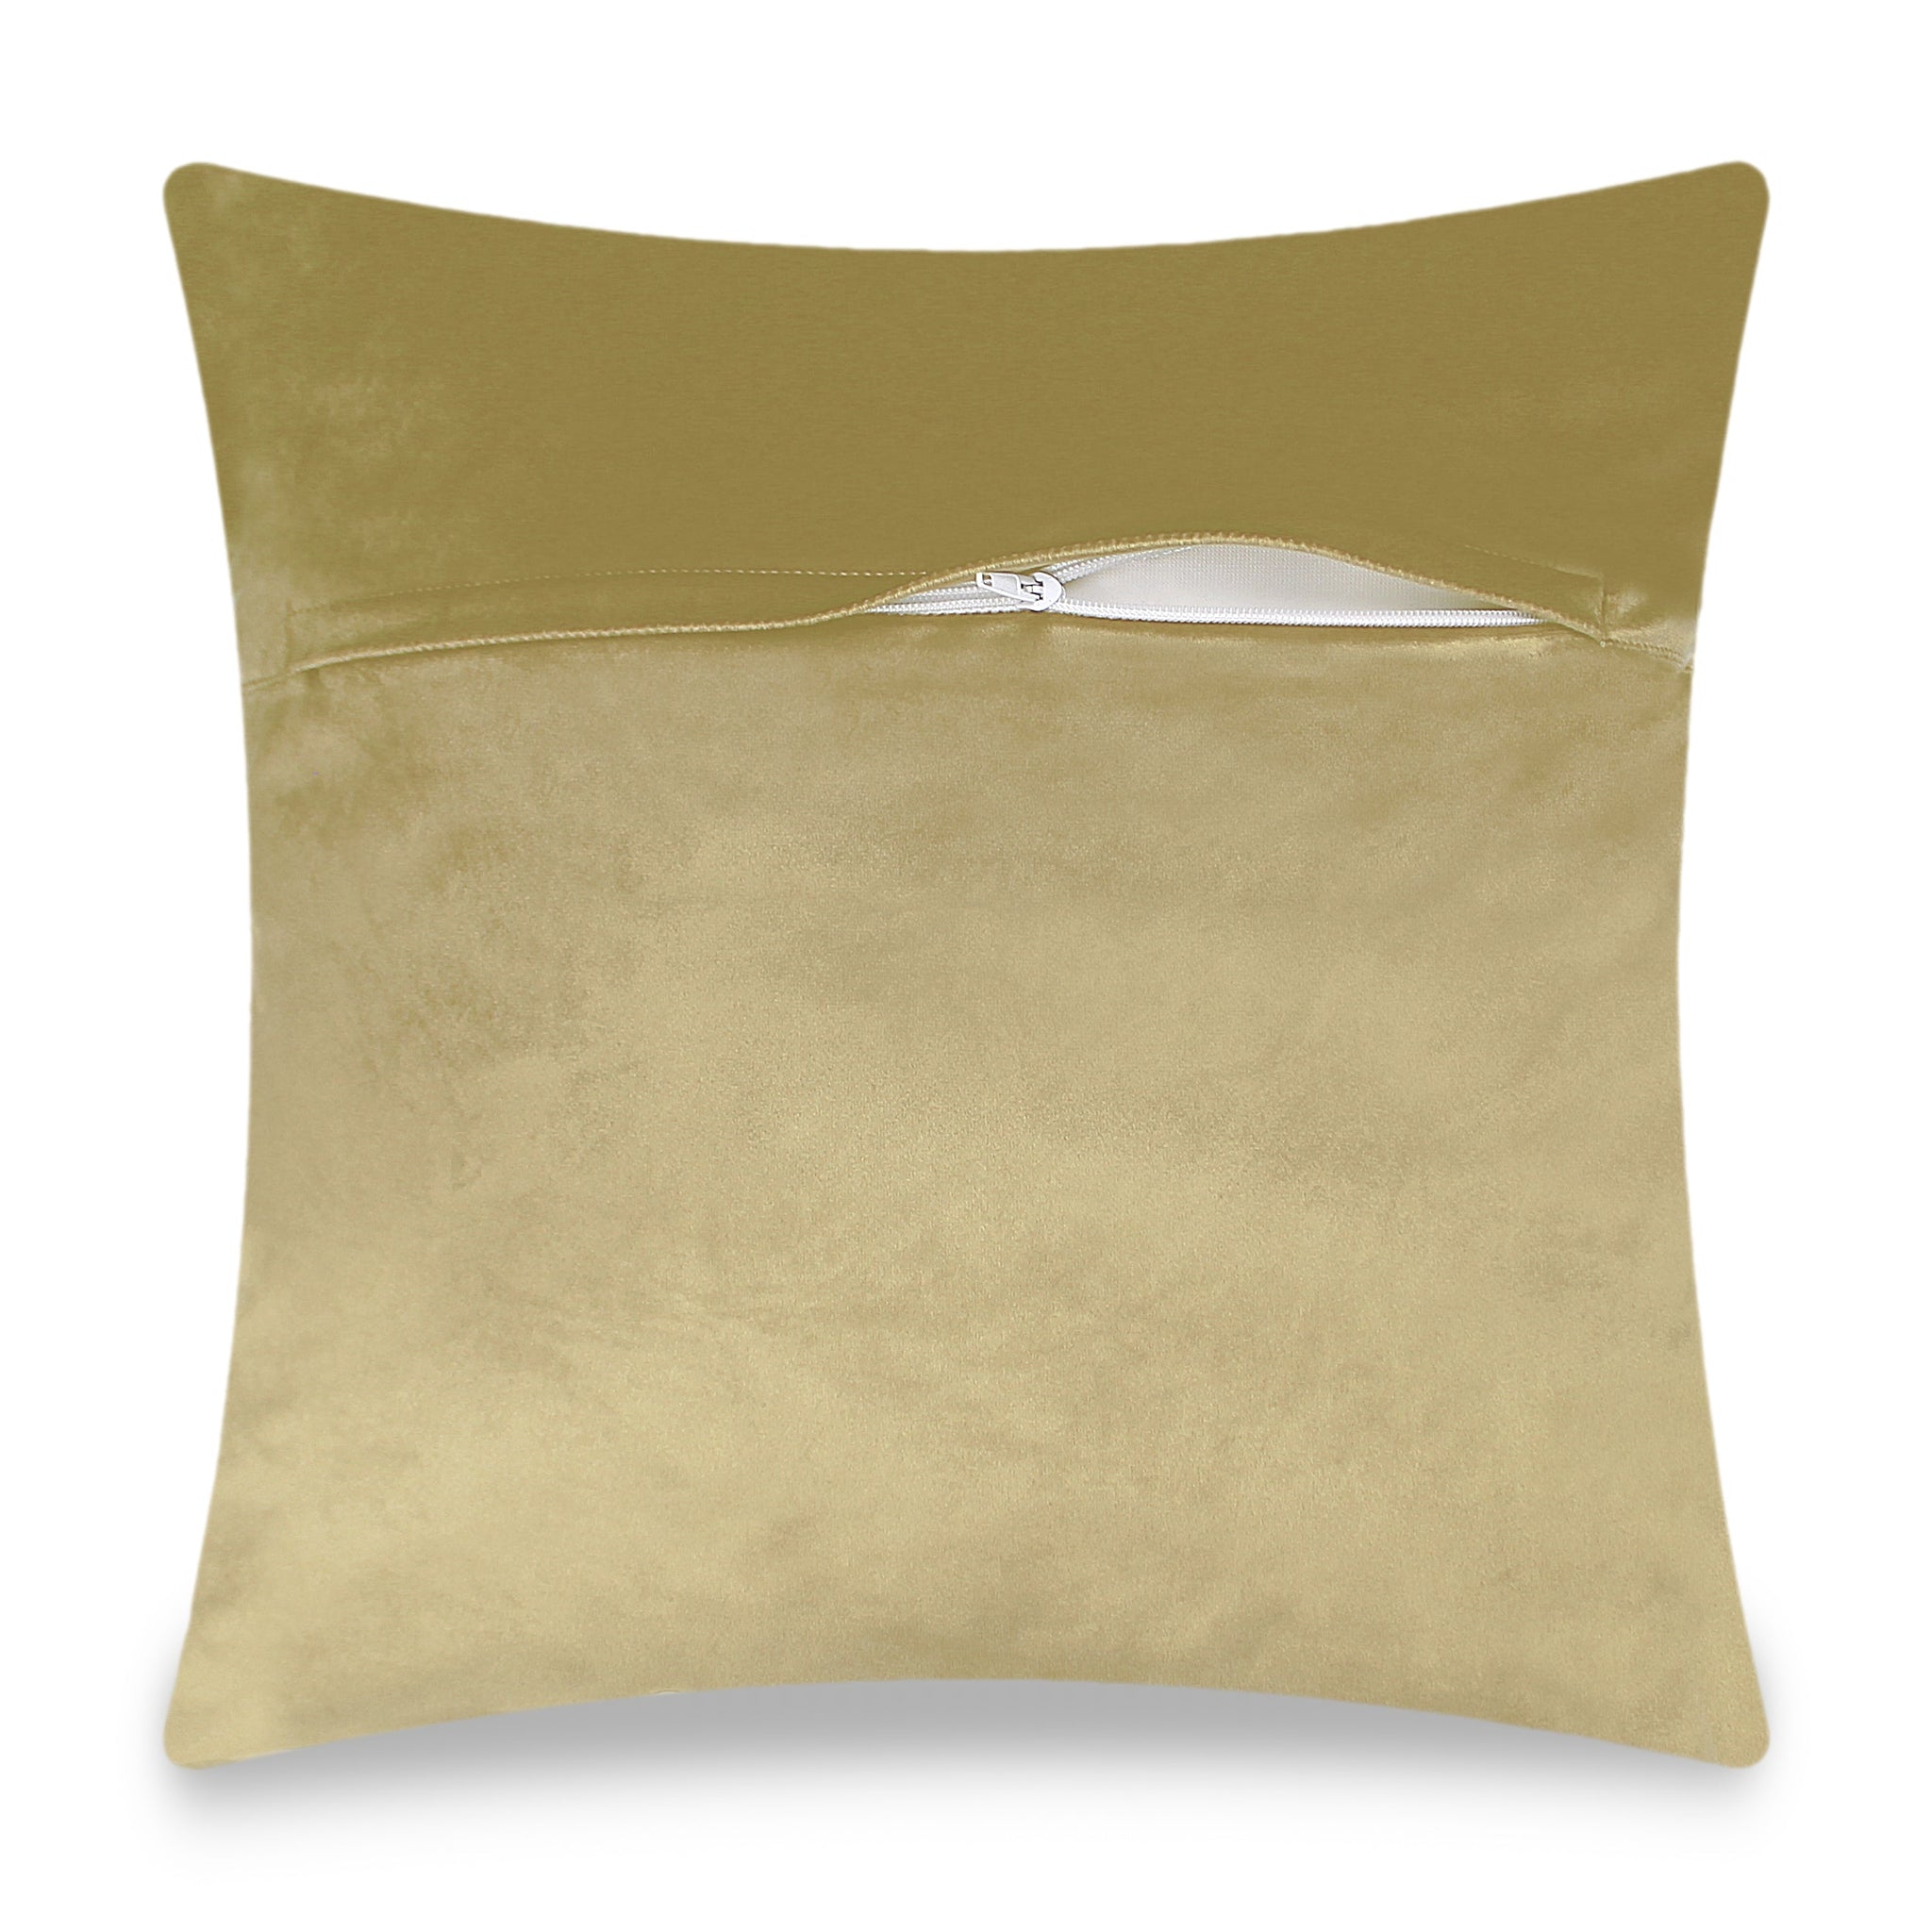 Gold Pillow Cover Velvet Decorative Cushion Cover Embroidery  Iconic Horse Throw Pillow Pillow Case for Sofa Chair Bedroom Living Room 45x45 cm 18x18 Inches